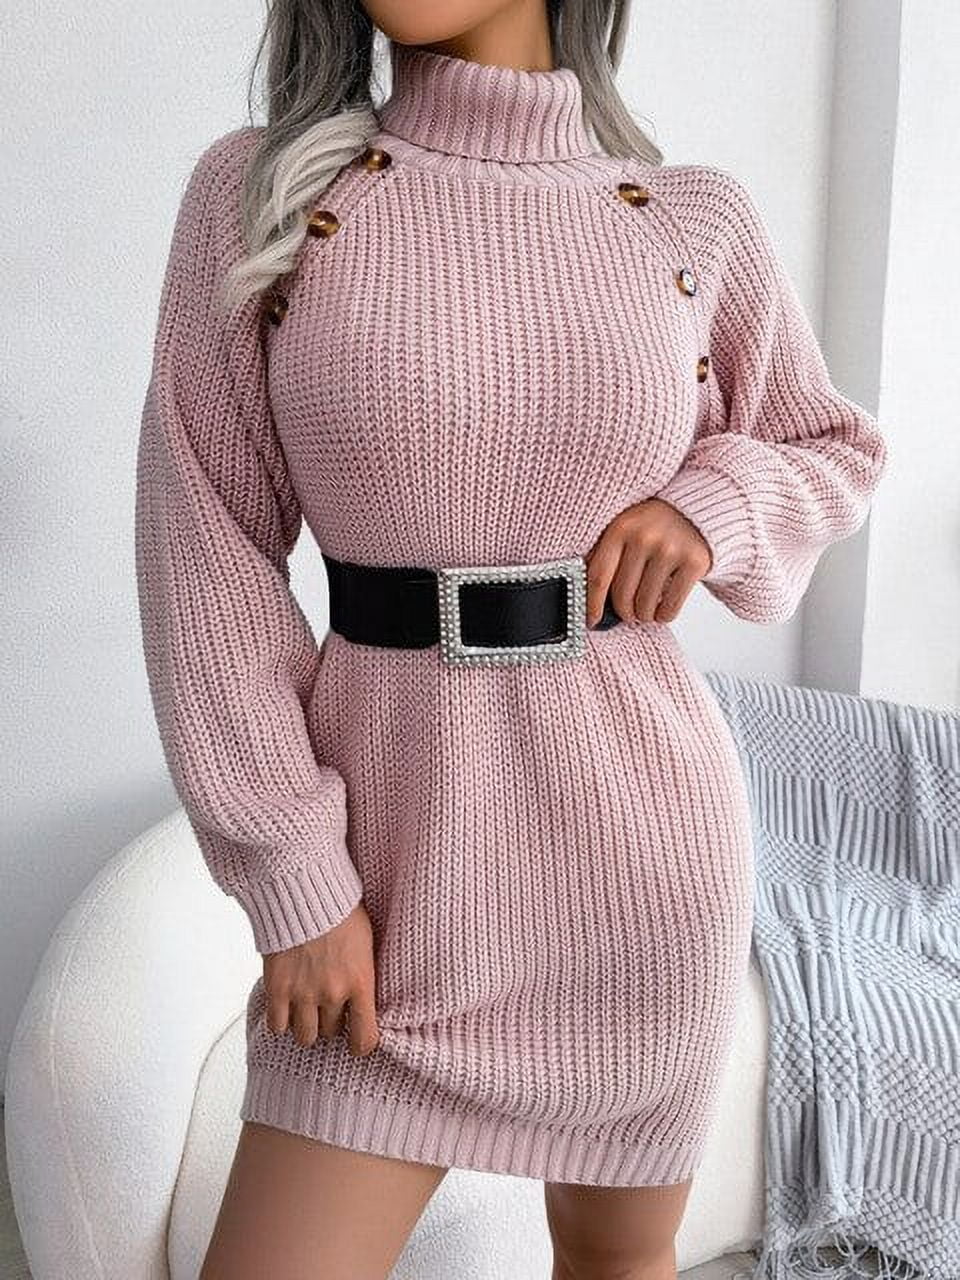 Buy Women Oversized Loose Long Pullover Sweater Dress Winter Knit Ripped  Jumper Tops Orange S at Amazon.in